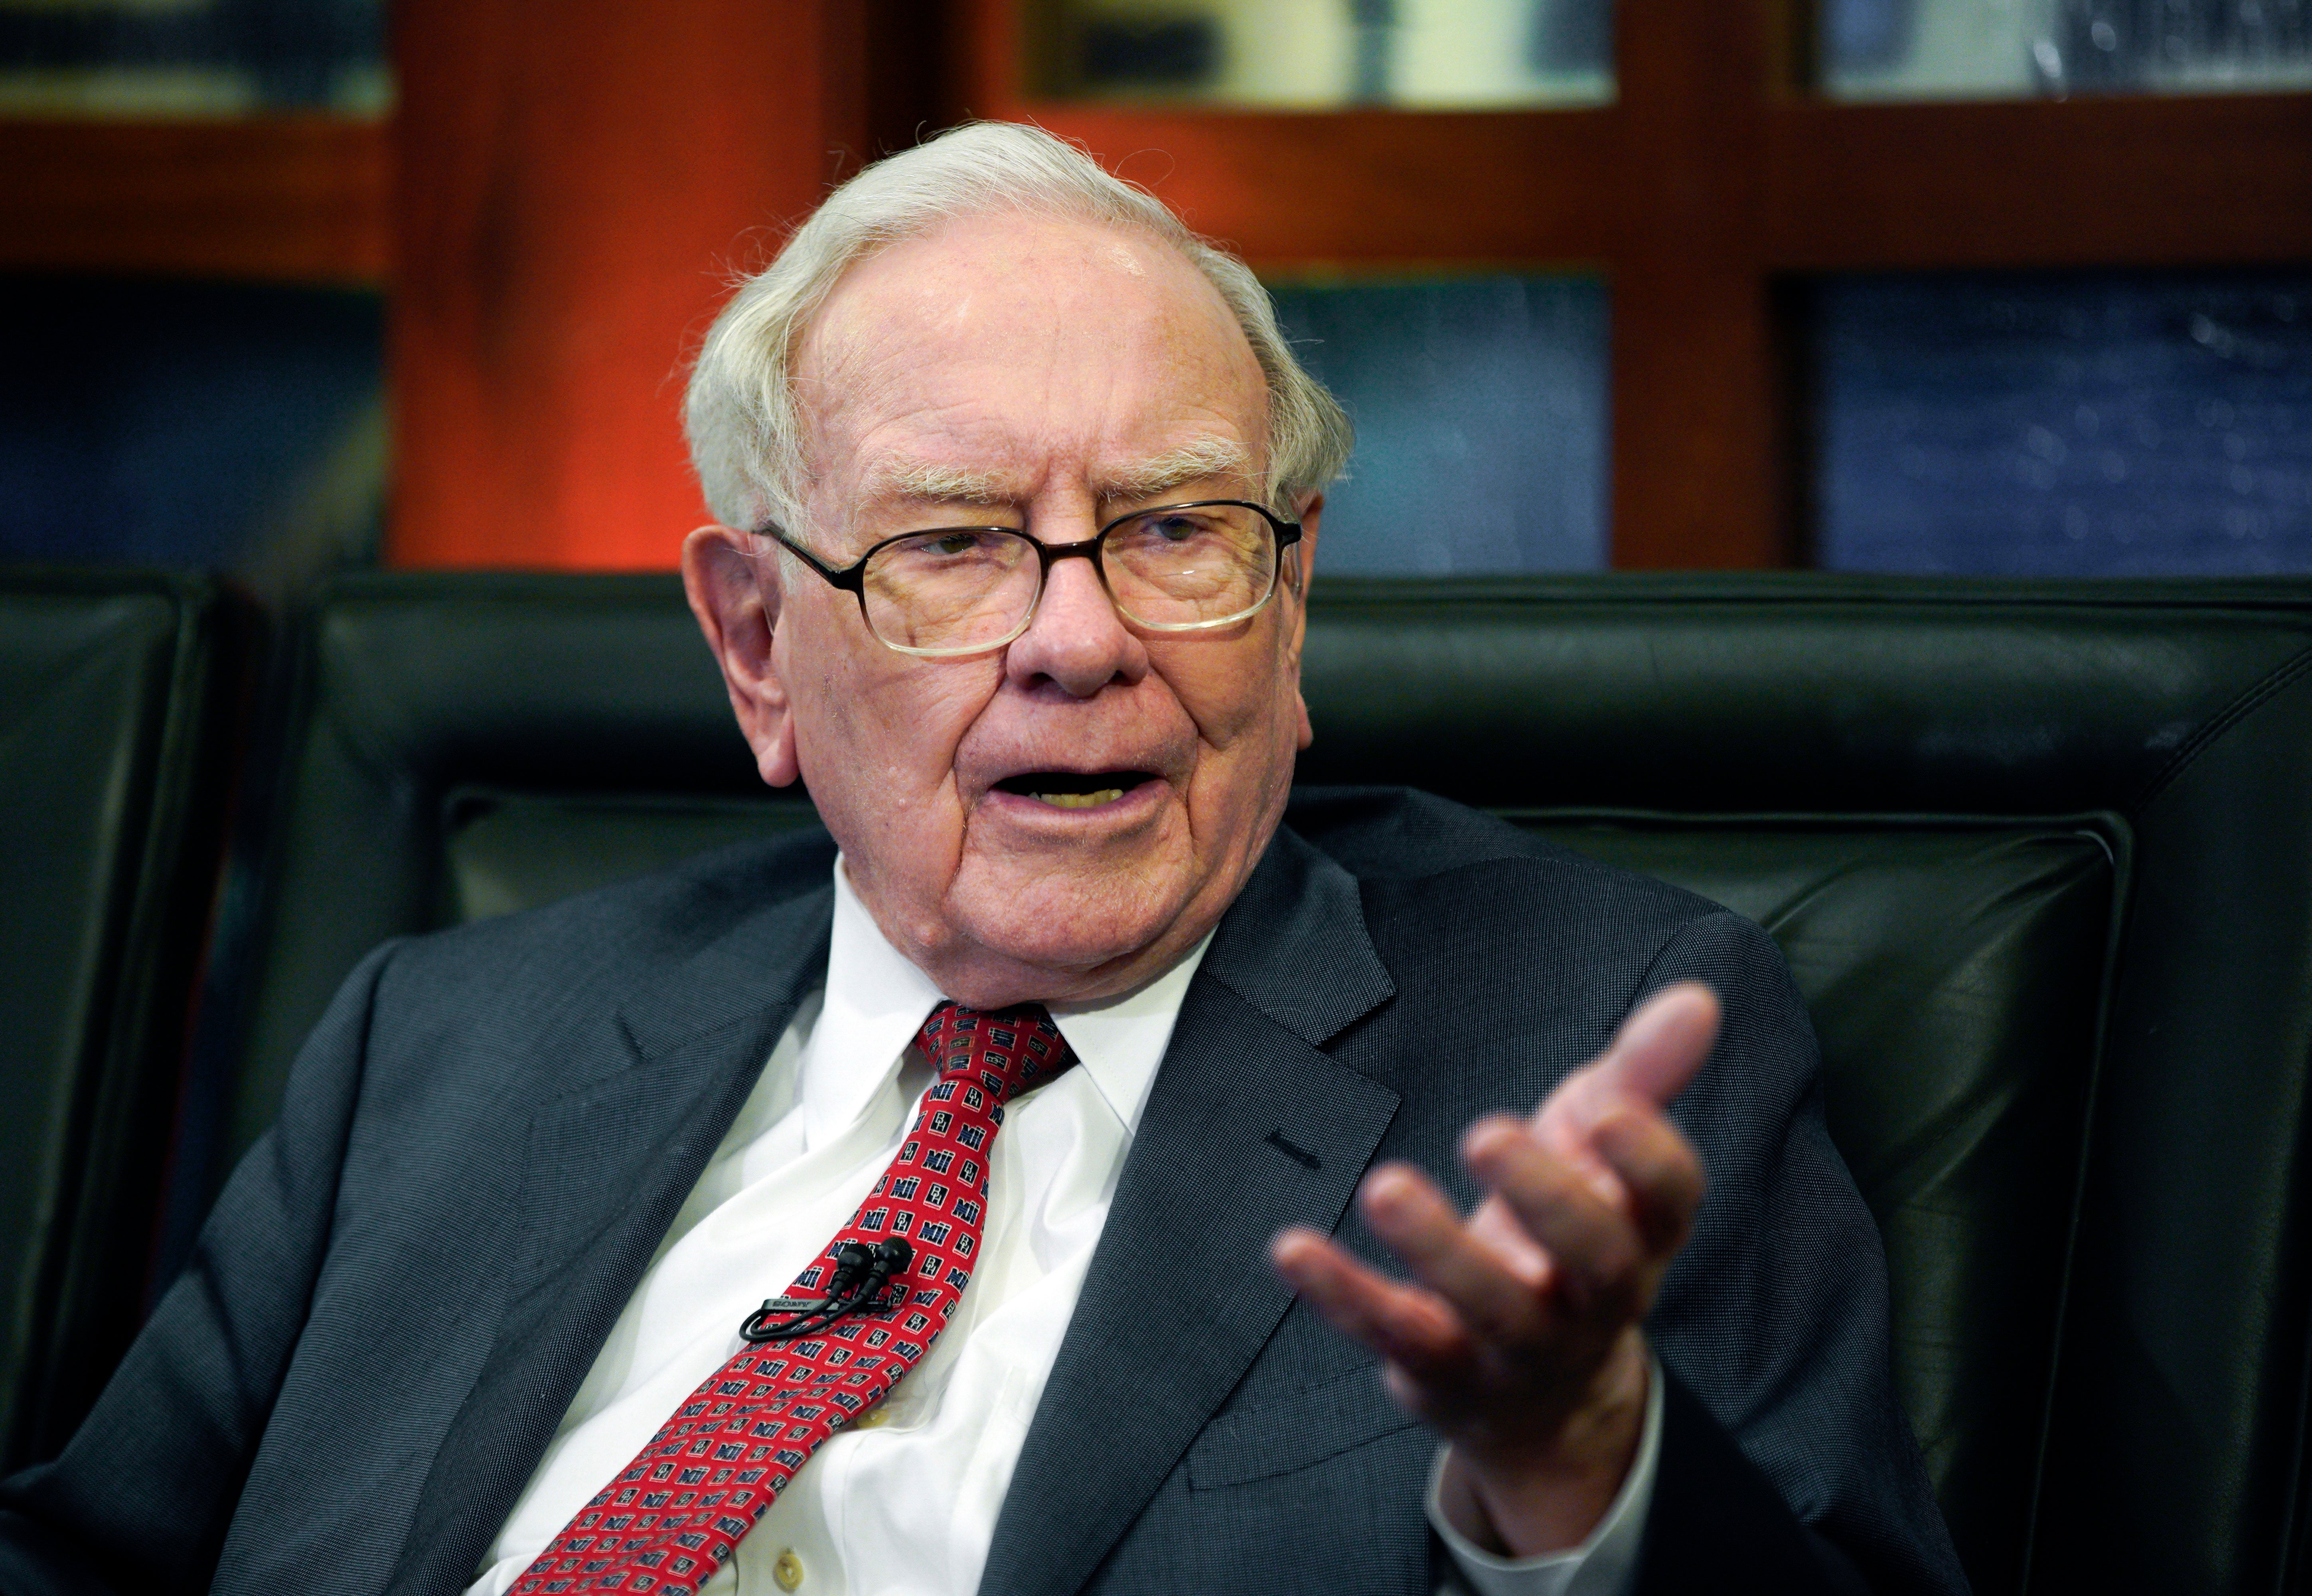 Warren Buffett speaking at a 2018 event in Omaha. His mystery stock has been revealed to be Chubb, an insurance agency that has been in operation since 1882